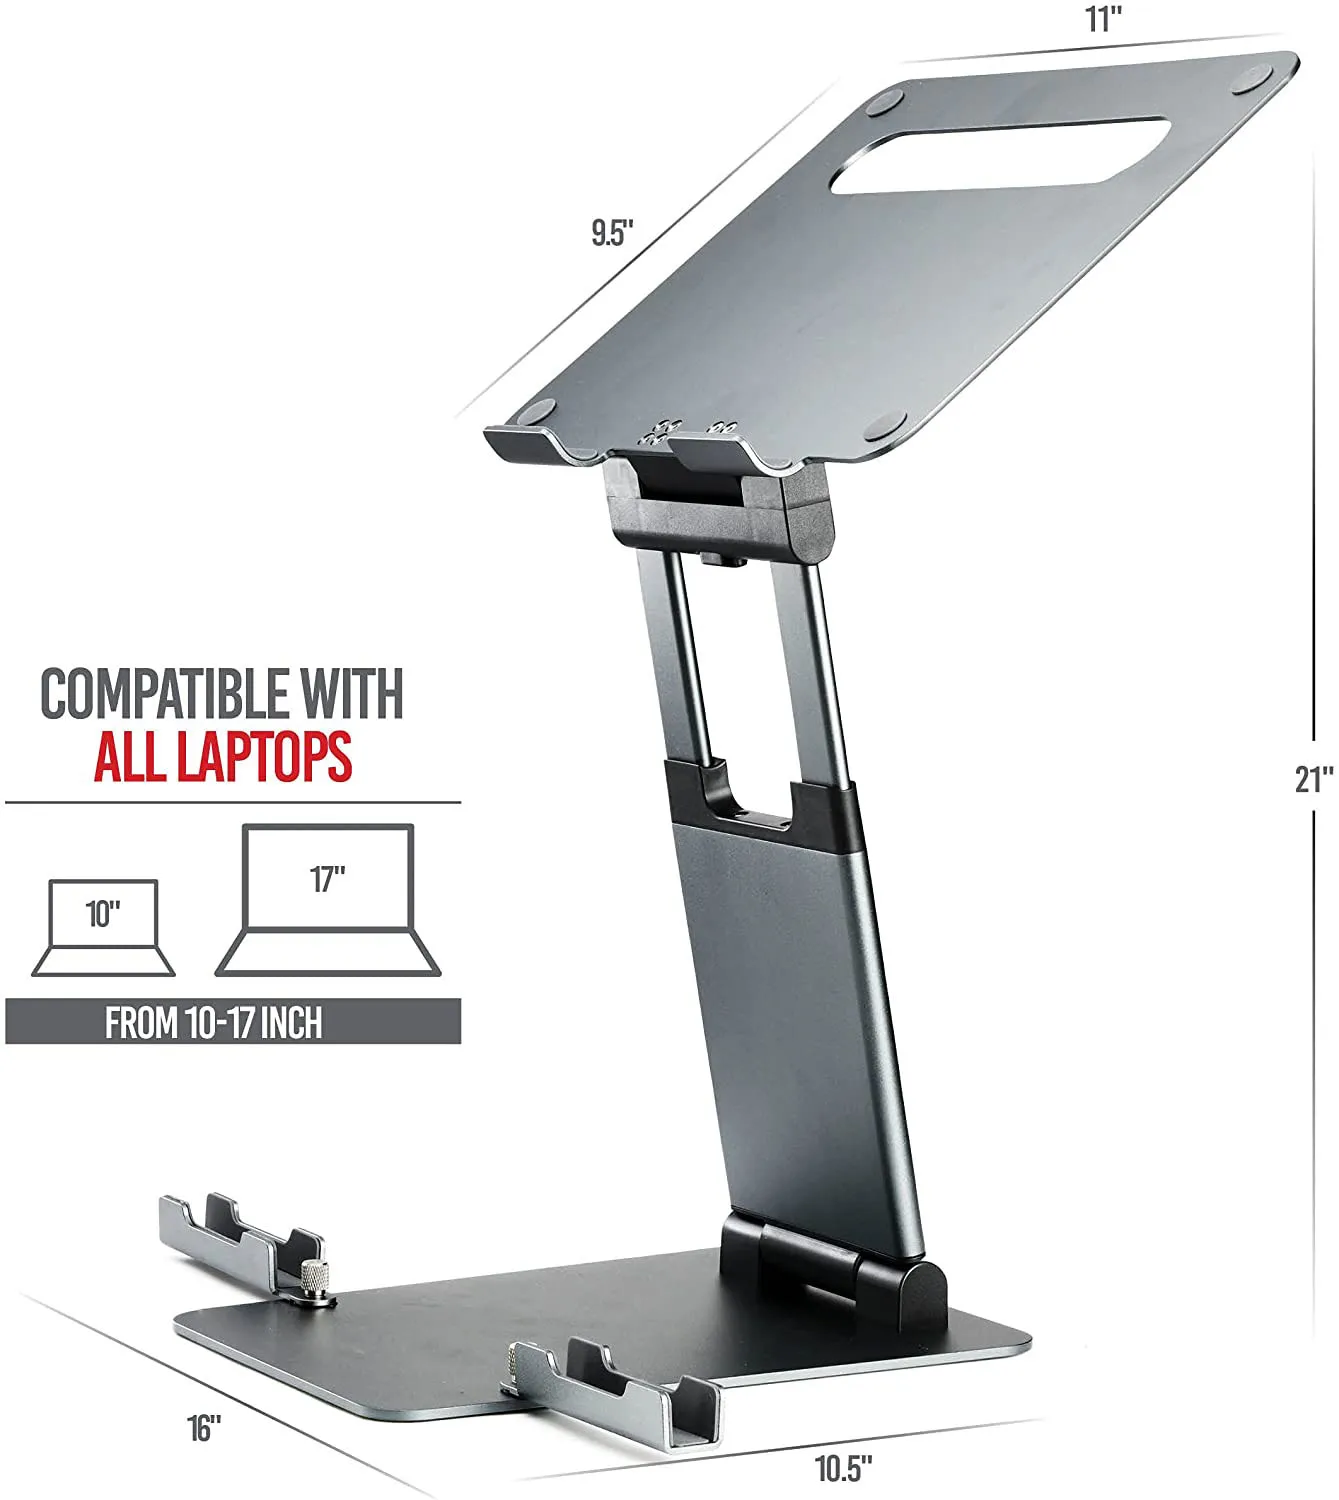 Ergonomic Adjustable height up to 20" laptop stand for desk Portable laptop riser with Phone Holder